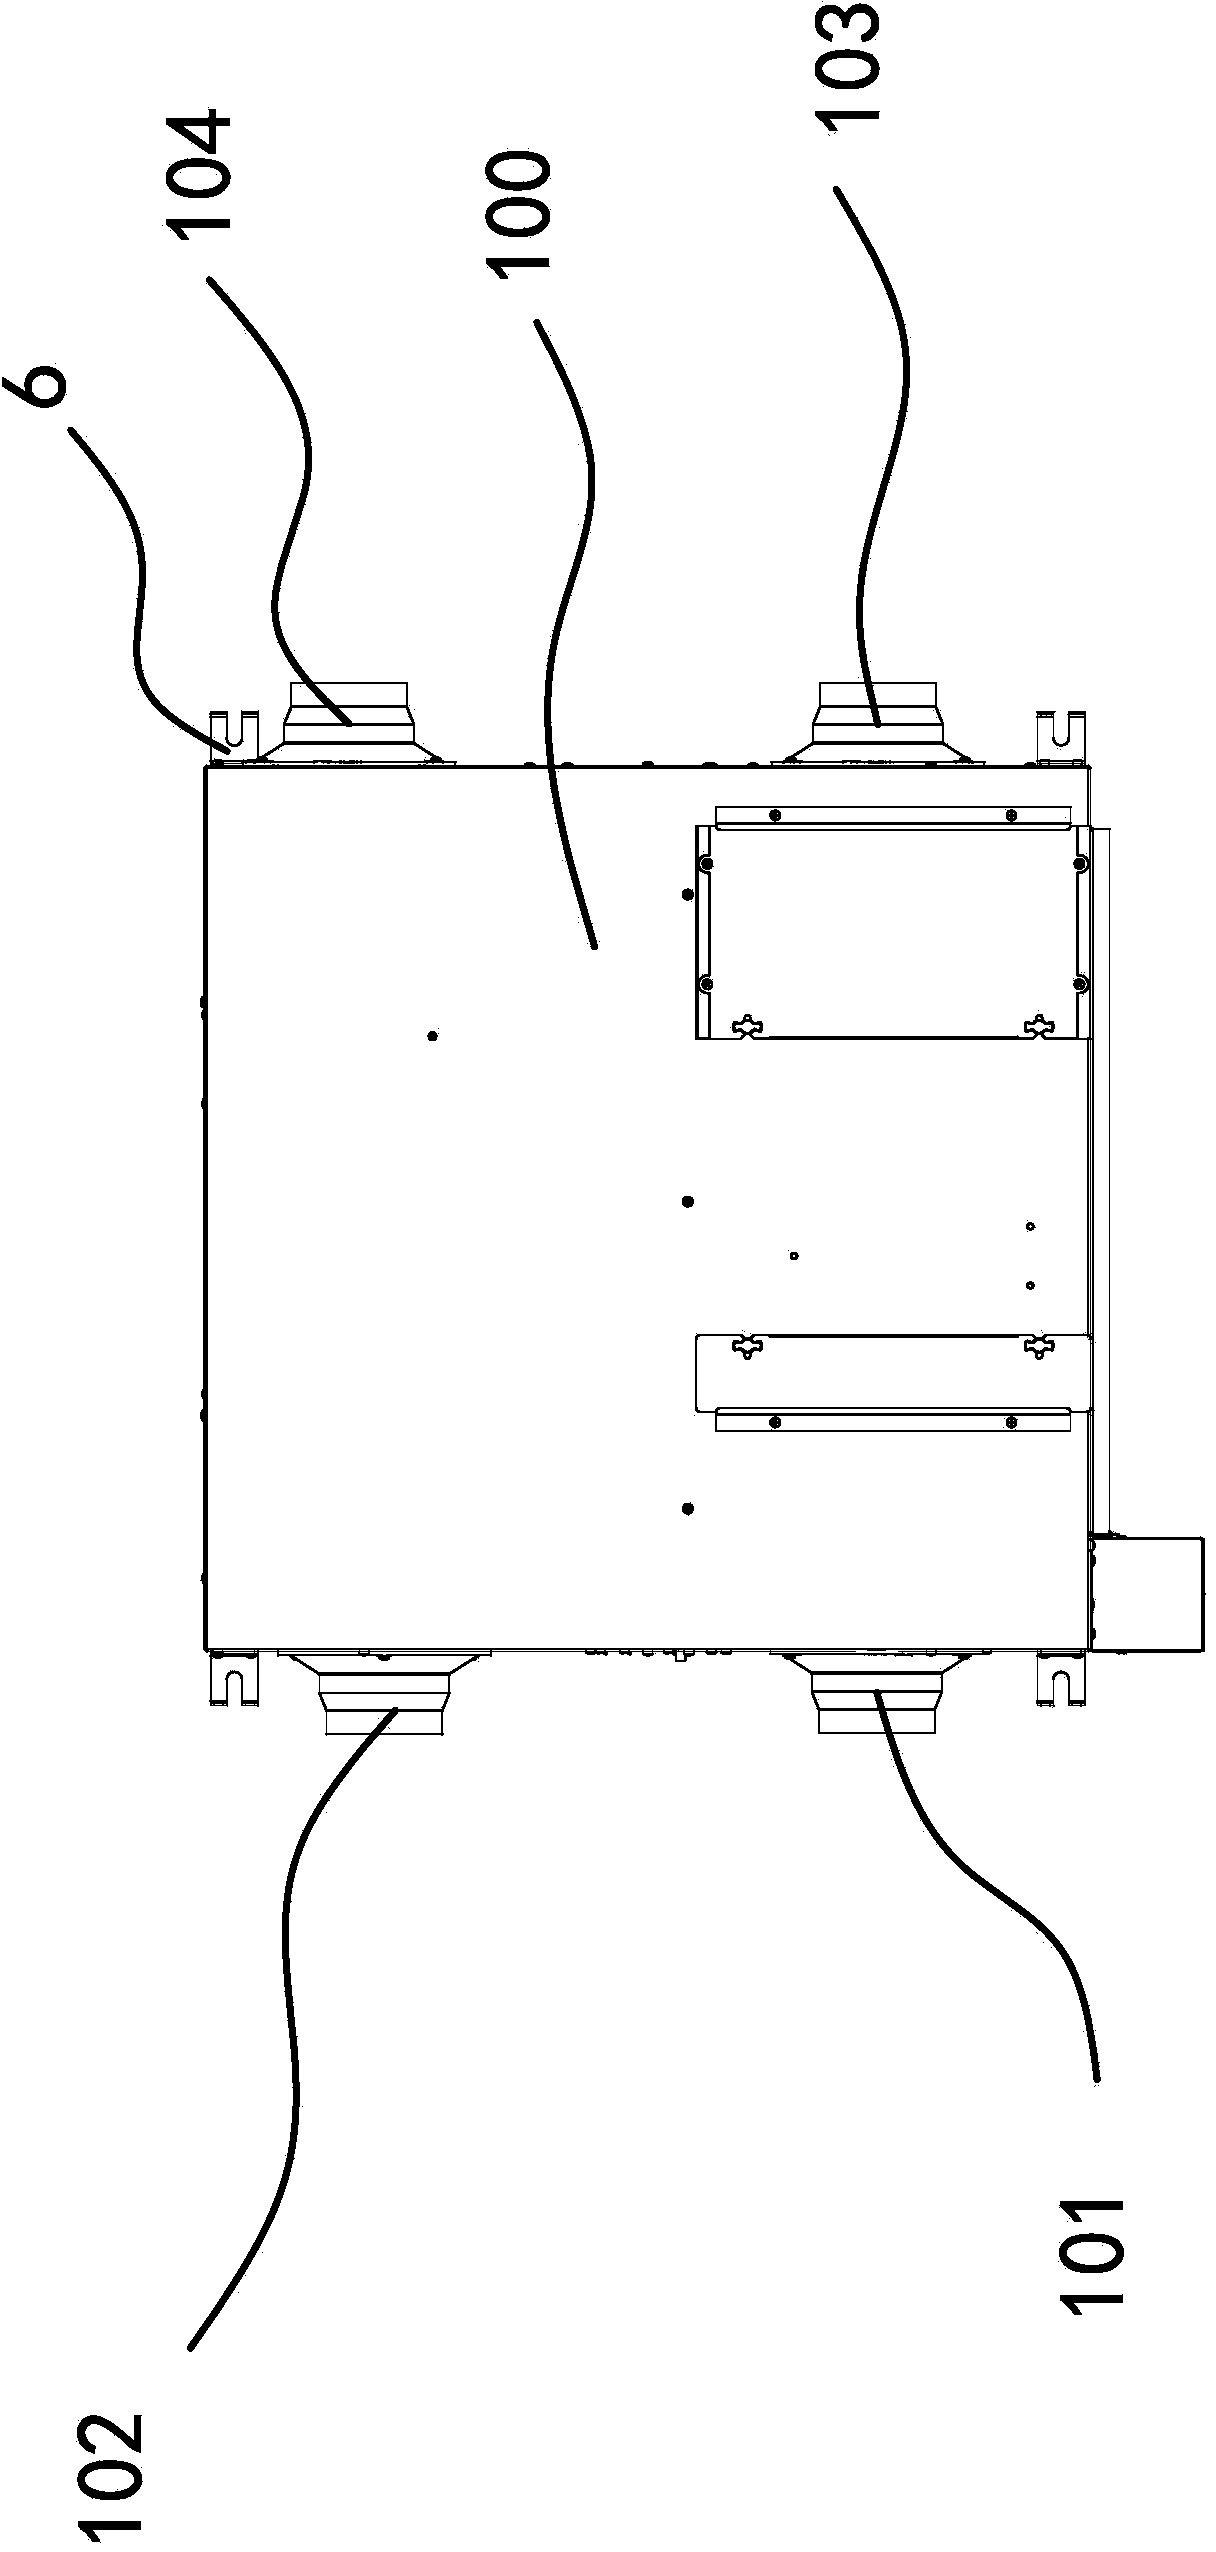 Whole-house air purifying system